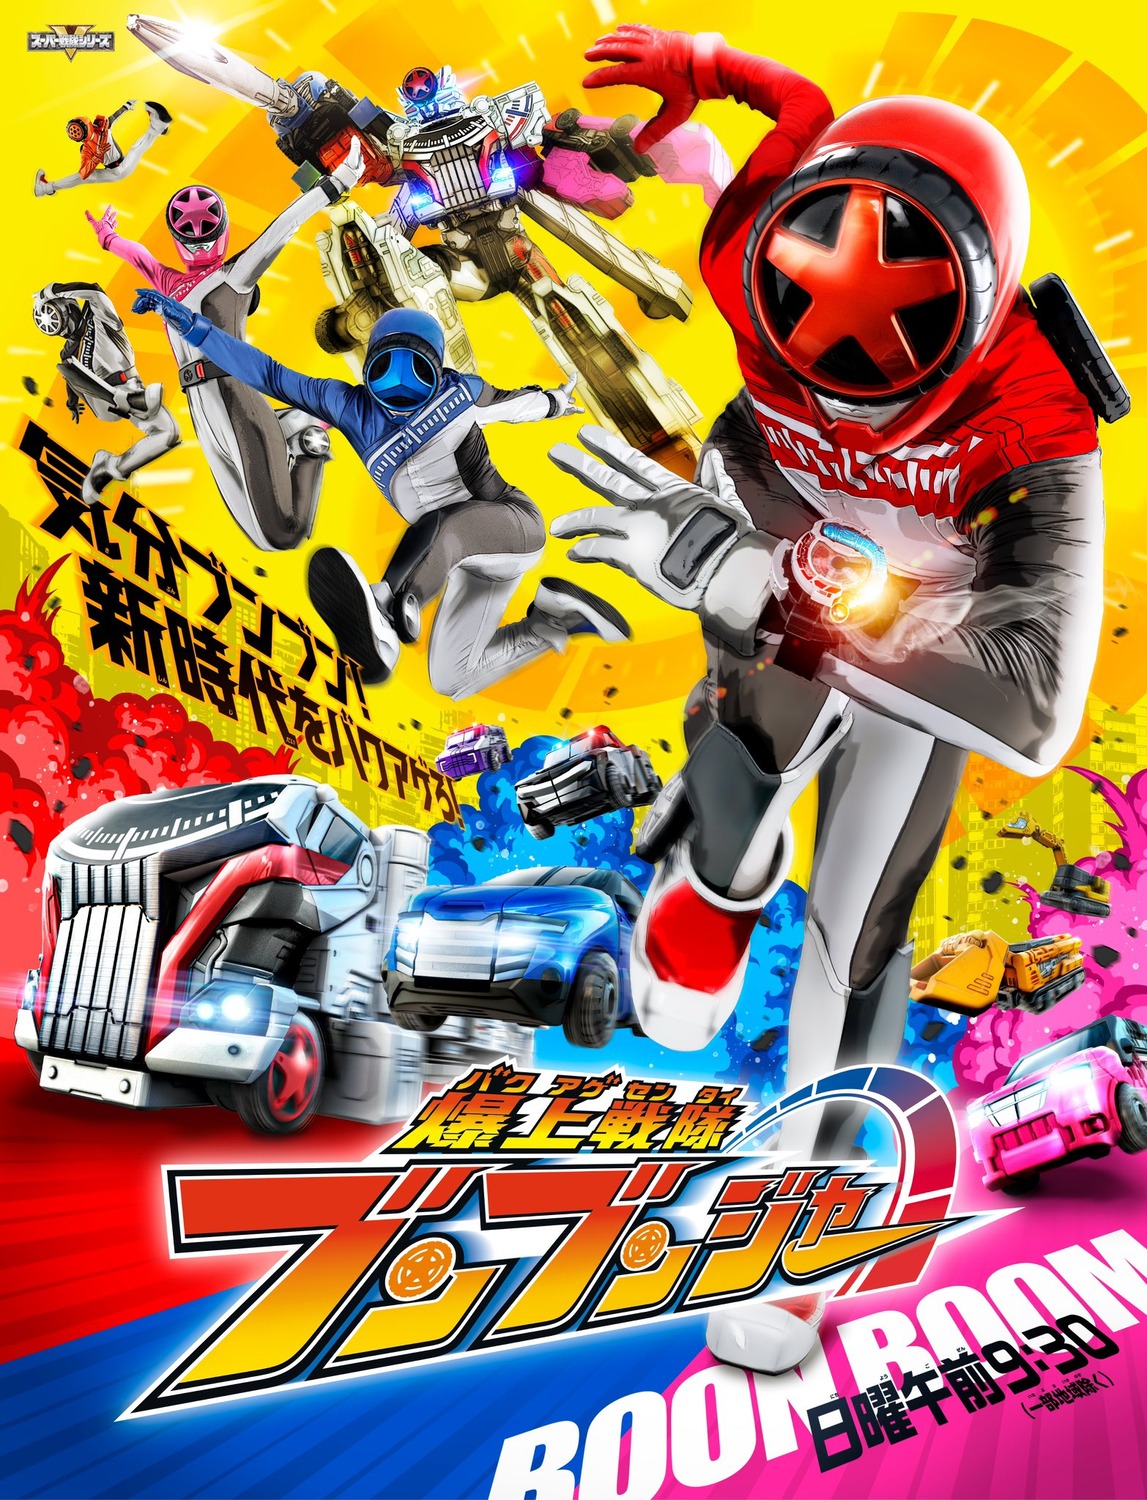 Extra Large TV Poster Image for Bakuage Sentai Boonboomger (#3 of 3)